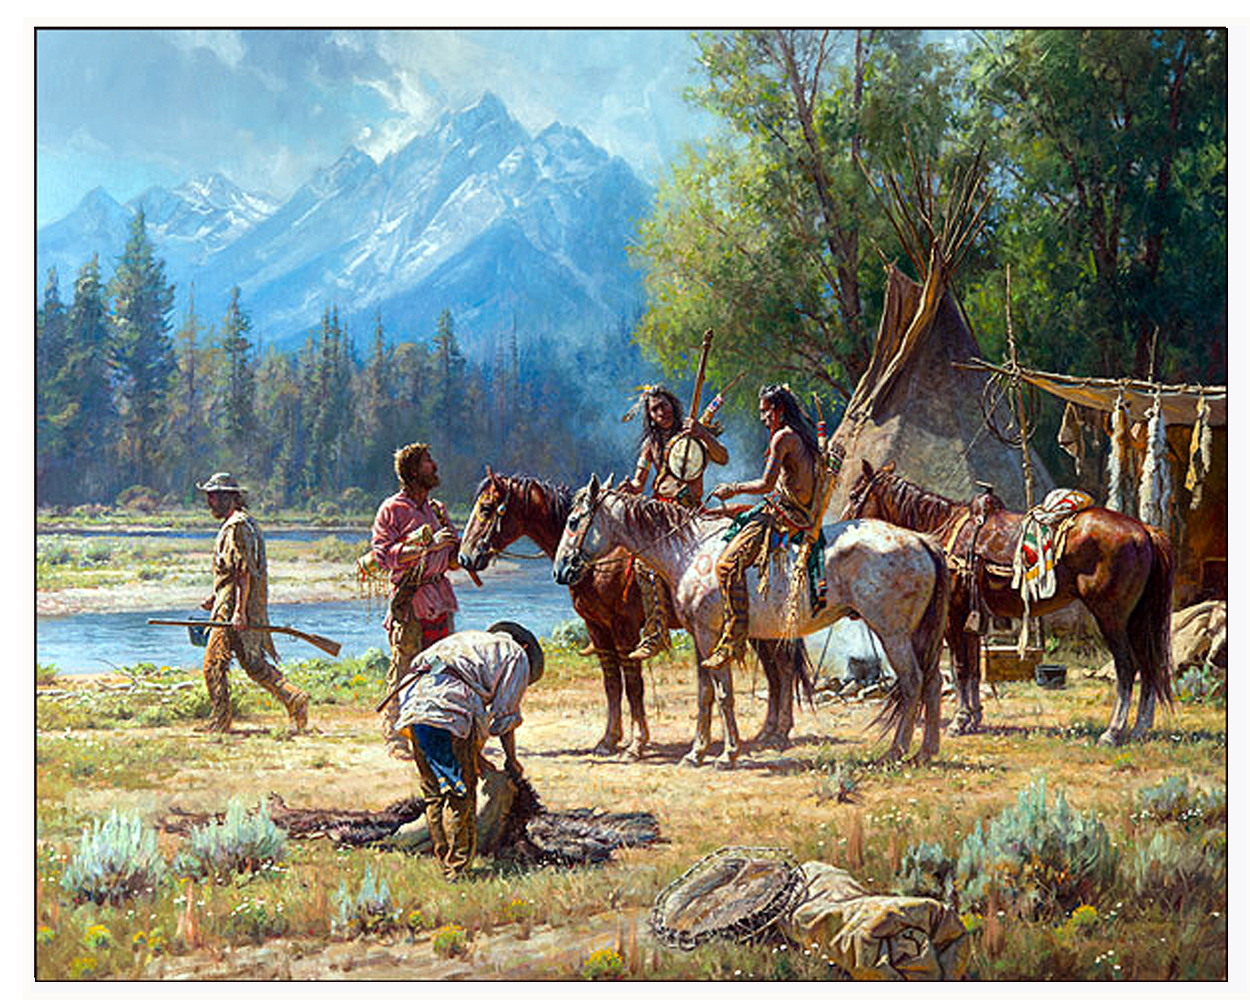 Copy of "Snake River Culture" by Martin Grelle Fine Art Reproduction